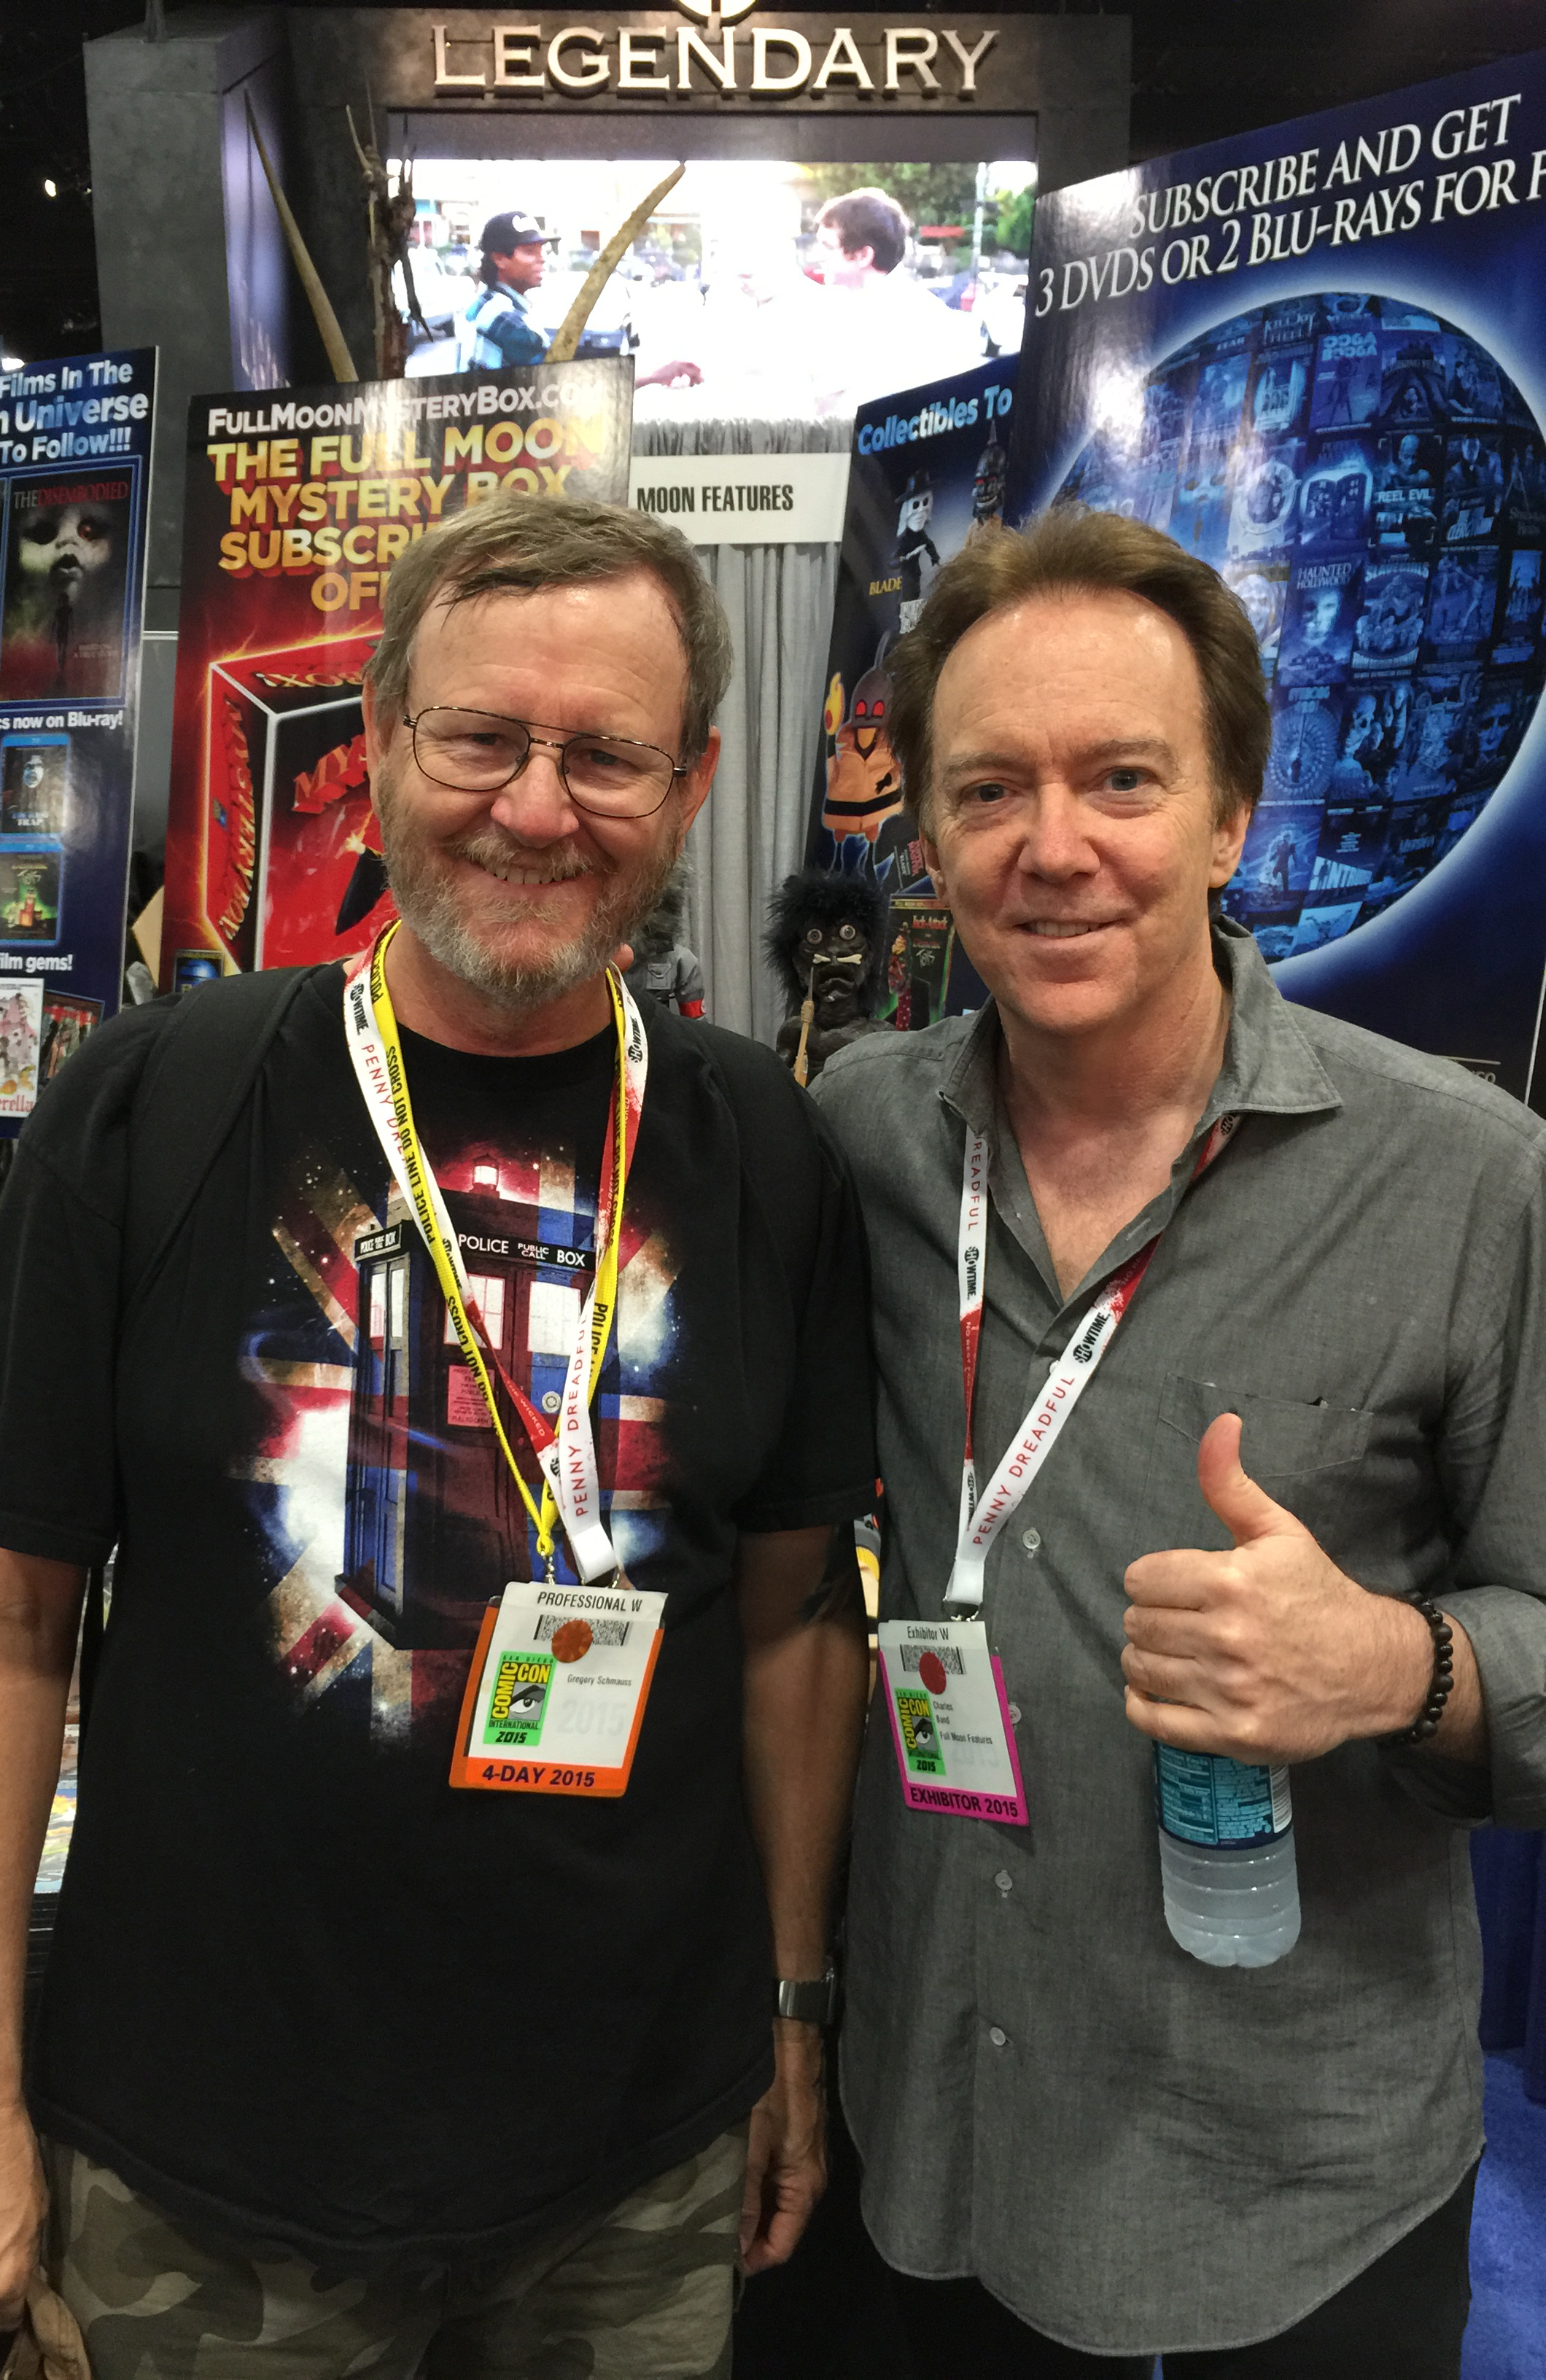 Gregory Schmauss with Director/Producer Charles Band at the 2015 San Diego Comic-Con.